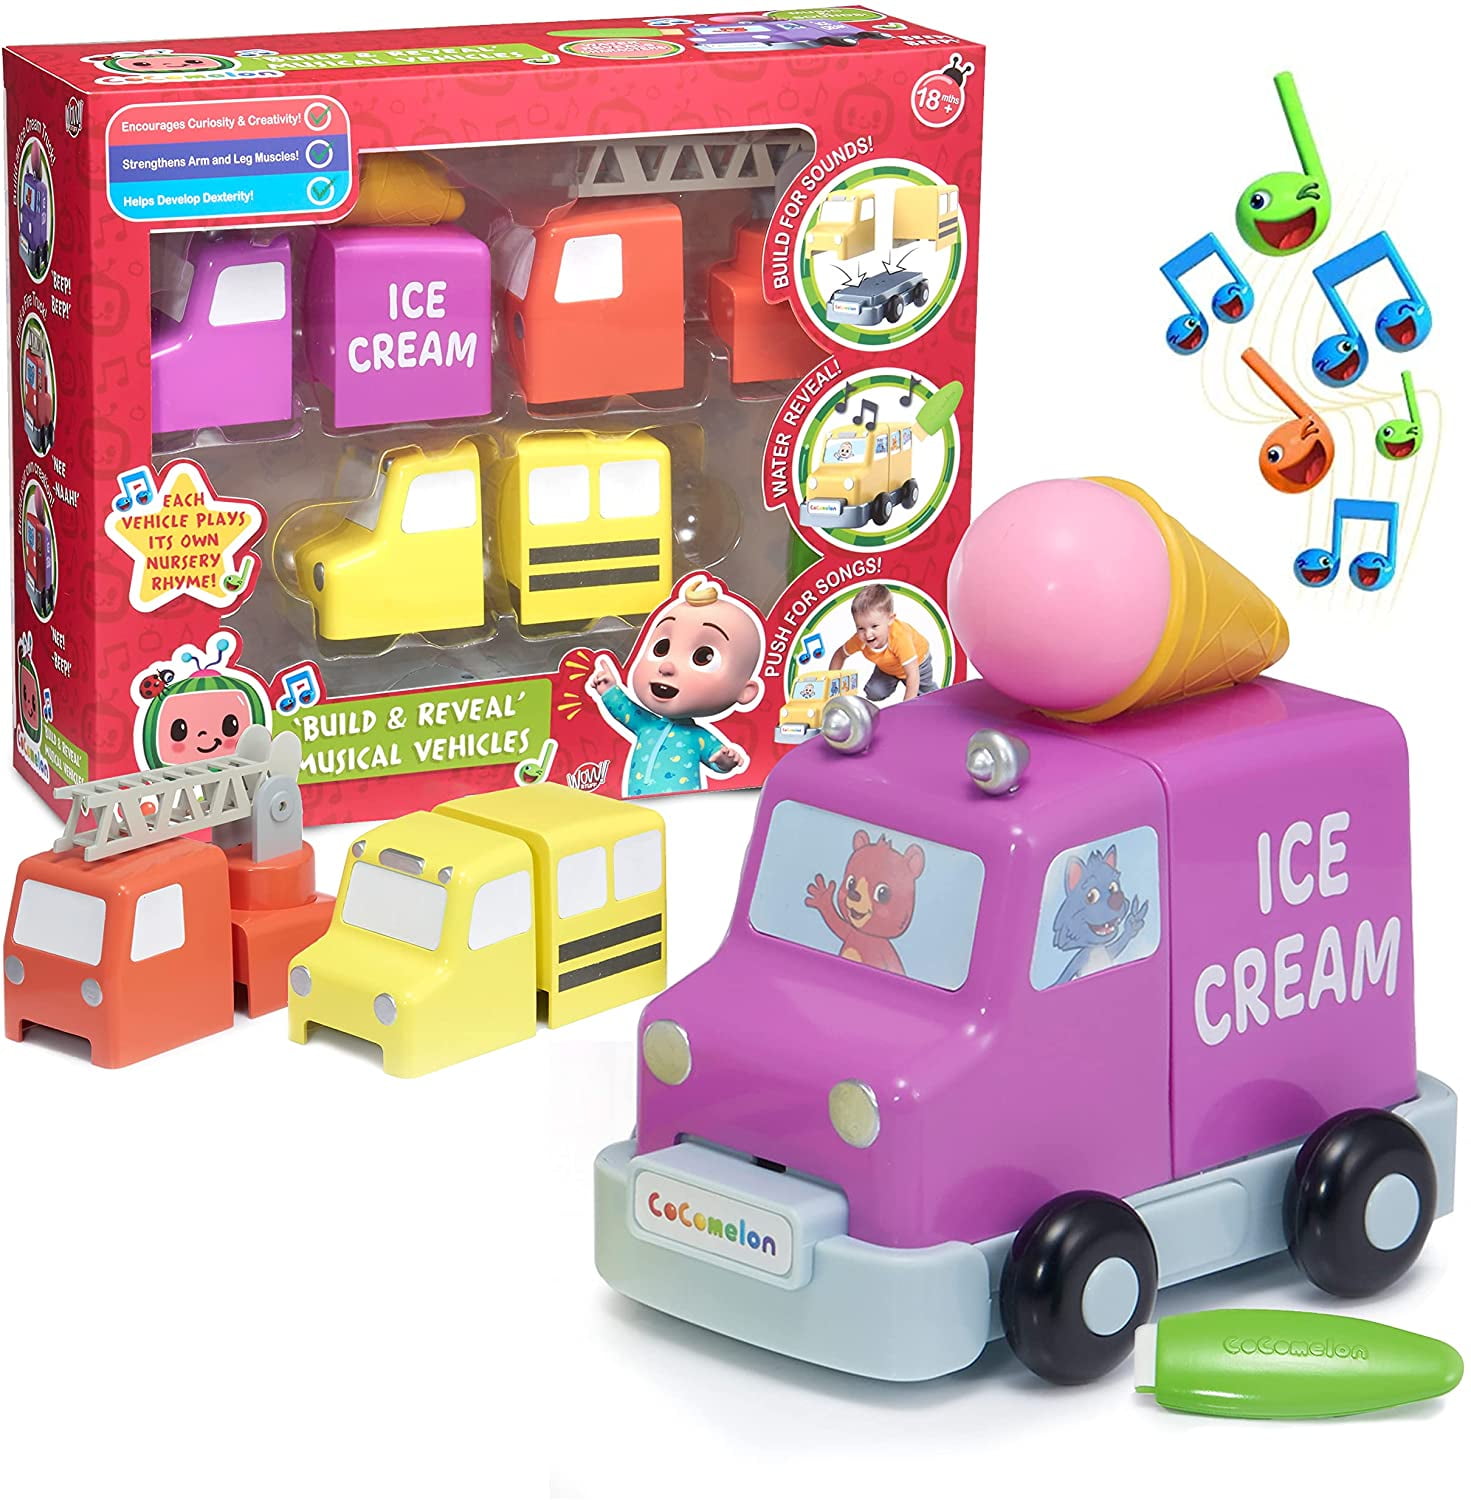 WOW Pre-School Learning Toy That Plays 6 Nursery Rhyme Songs PODS CoComelon Toys Musical Clever Building Blocks for Toddlers Both Girls and Boys 2 3 4 and 5 Years Old 